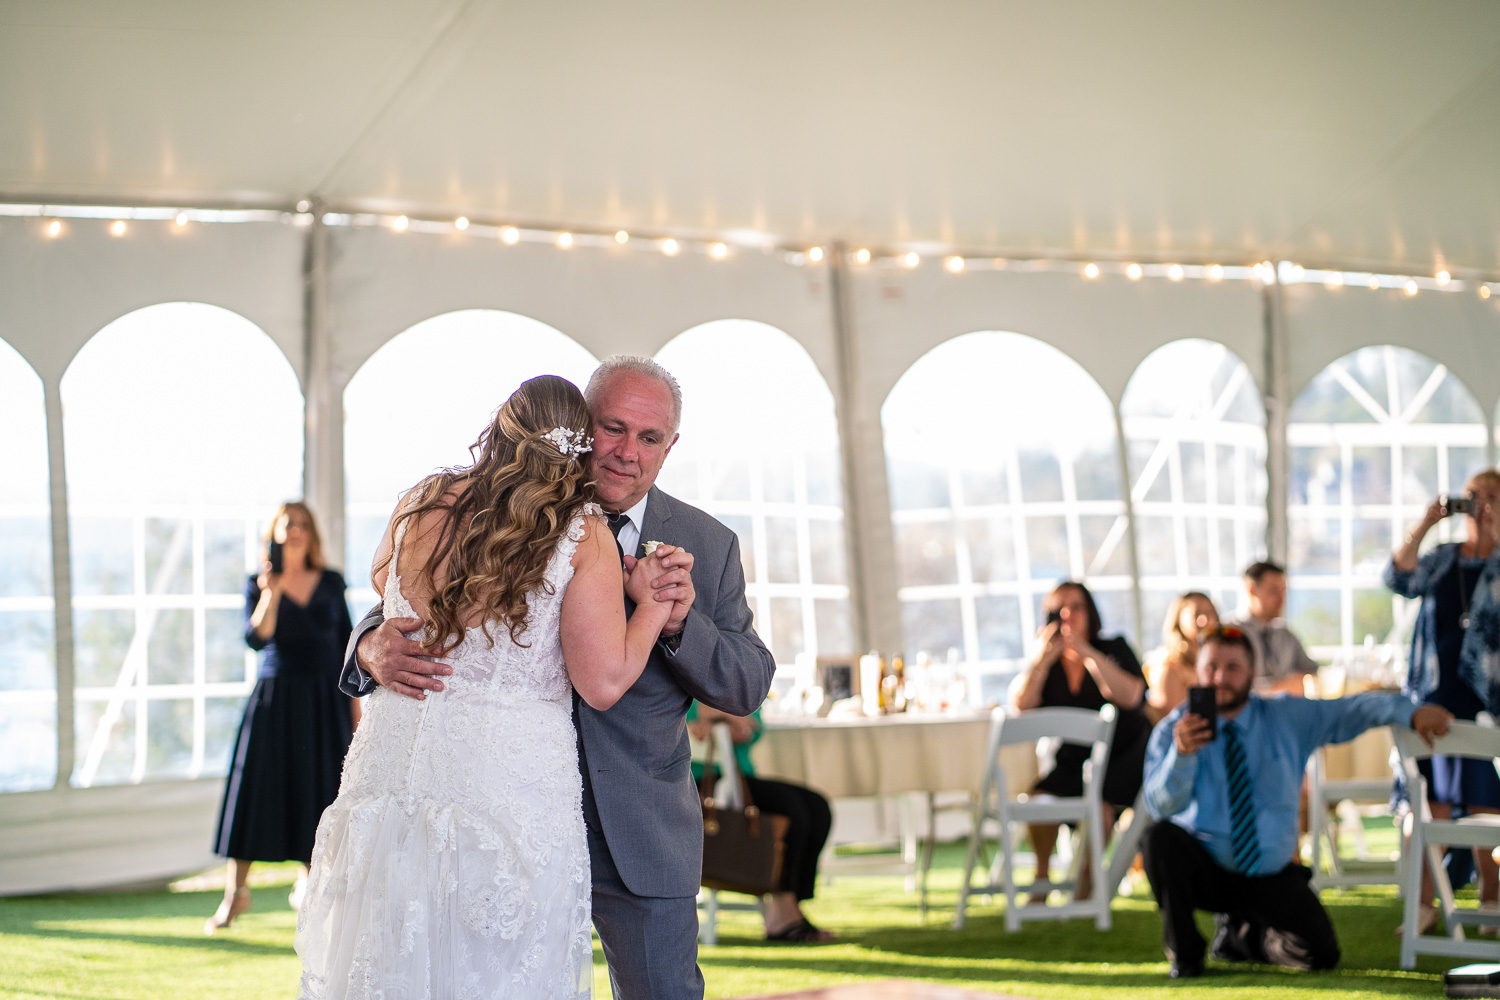 Father of the bride and bride dance at the lakeside wedding